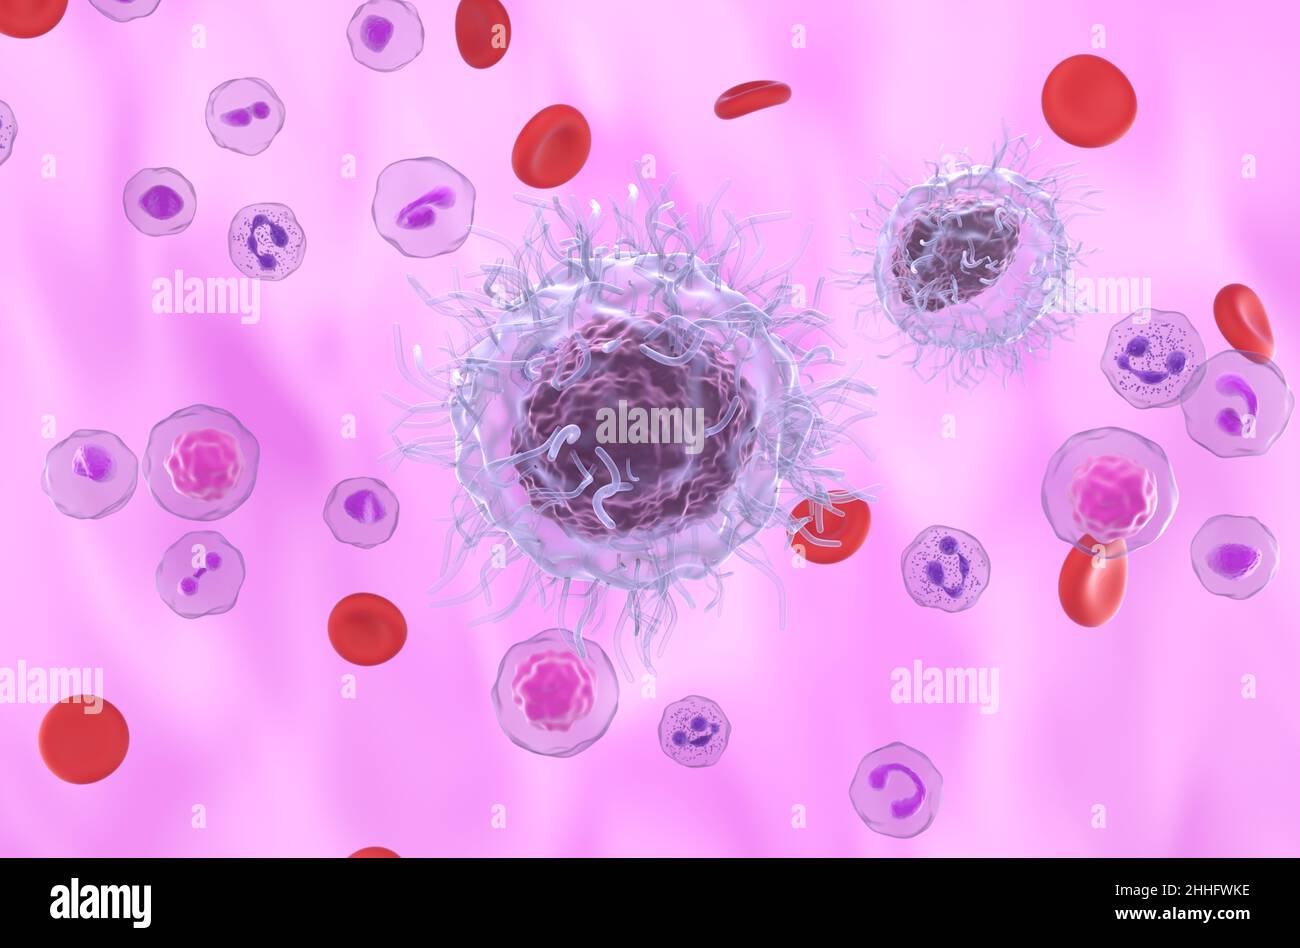 Hairy Cell Leukemia (HCL, HZL) cells in blood flow - isometric view 3d illustration Stock Photo